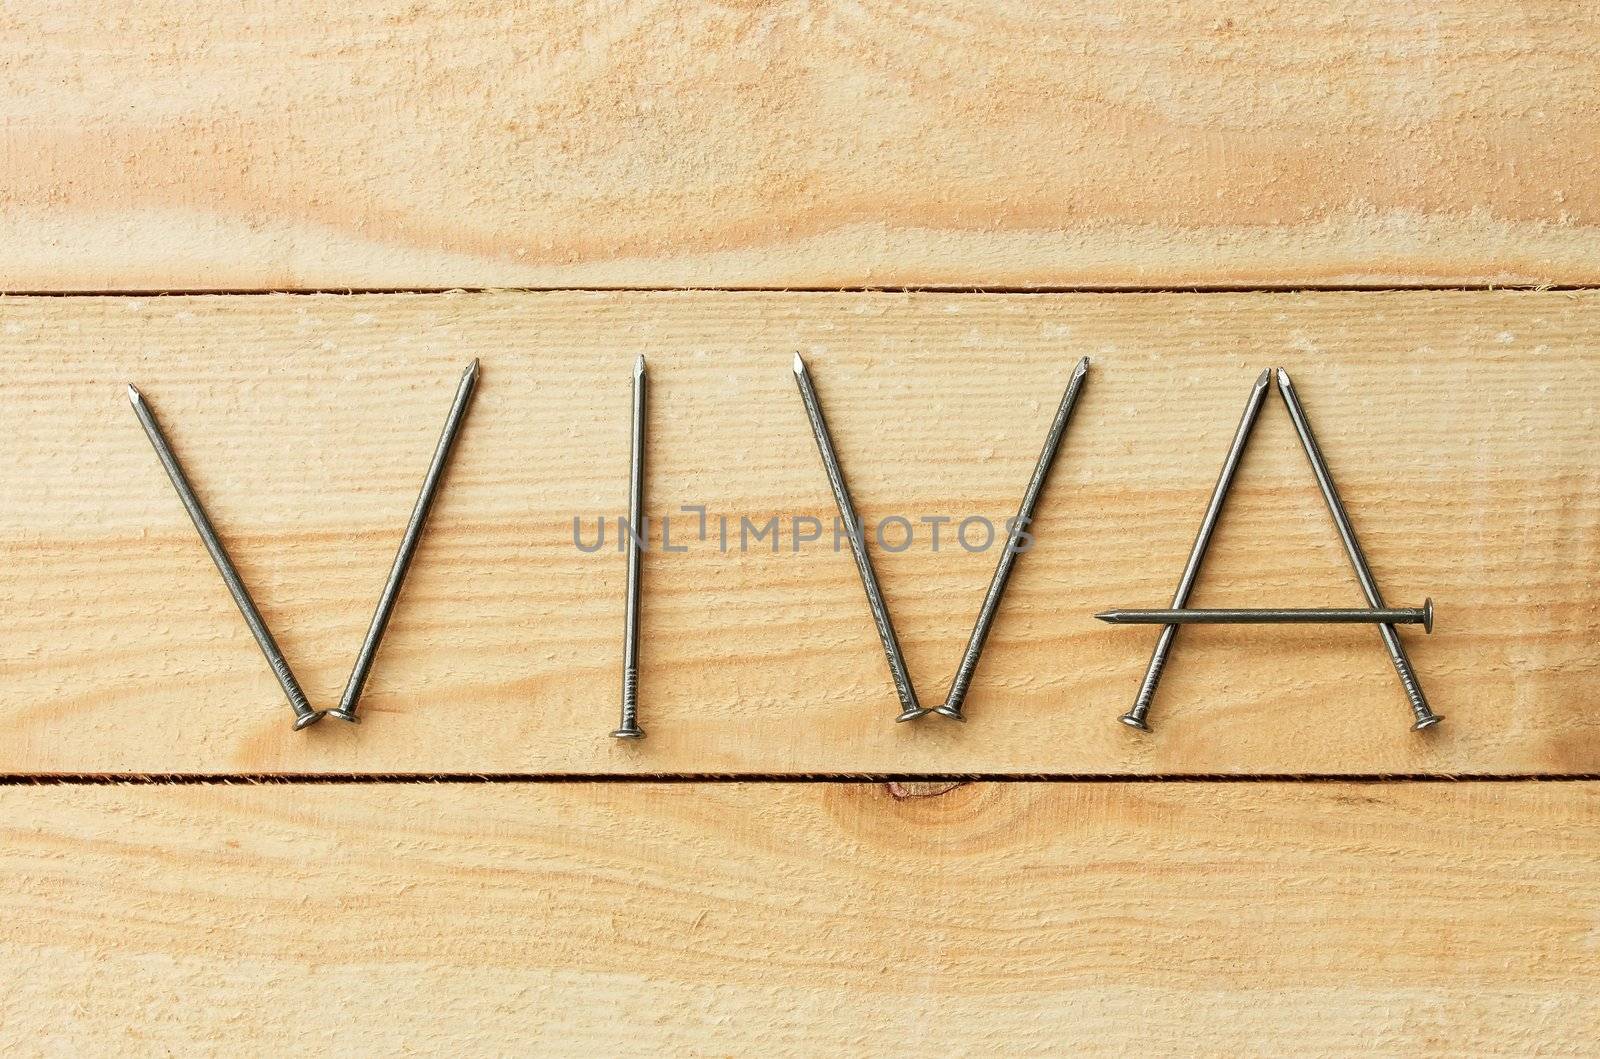 VIVA word is composed with nails  by qiiip